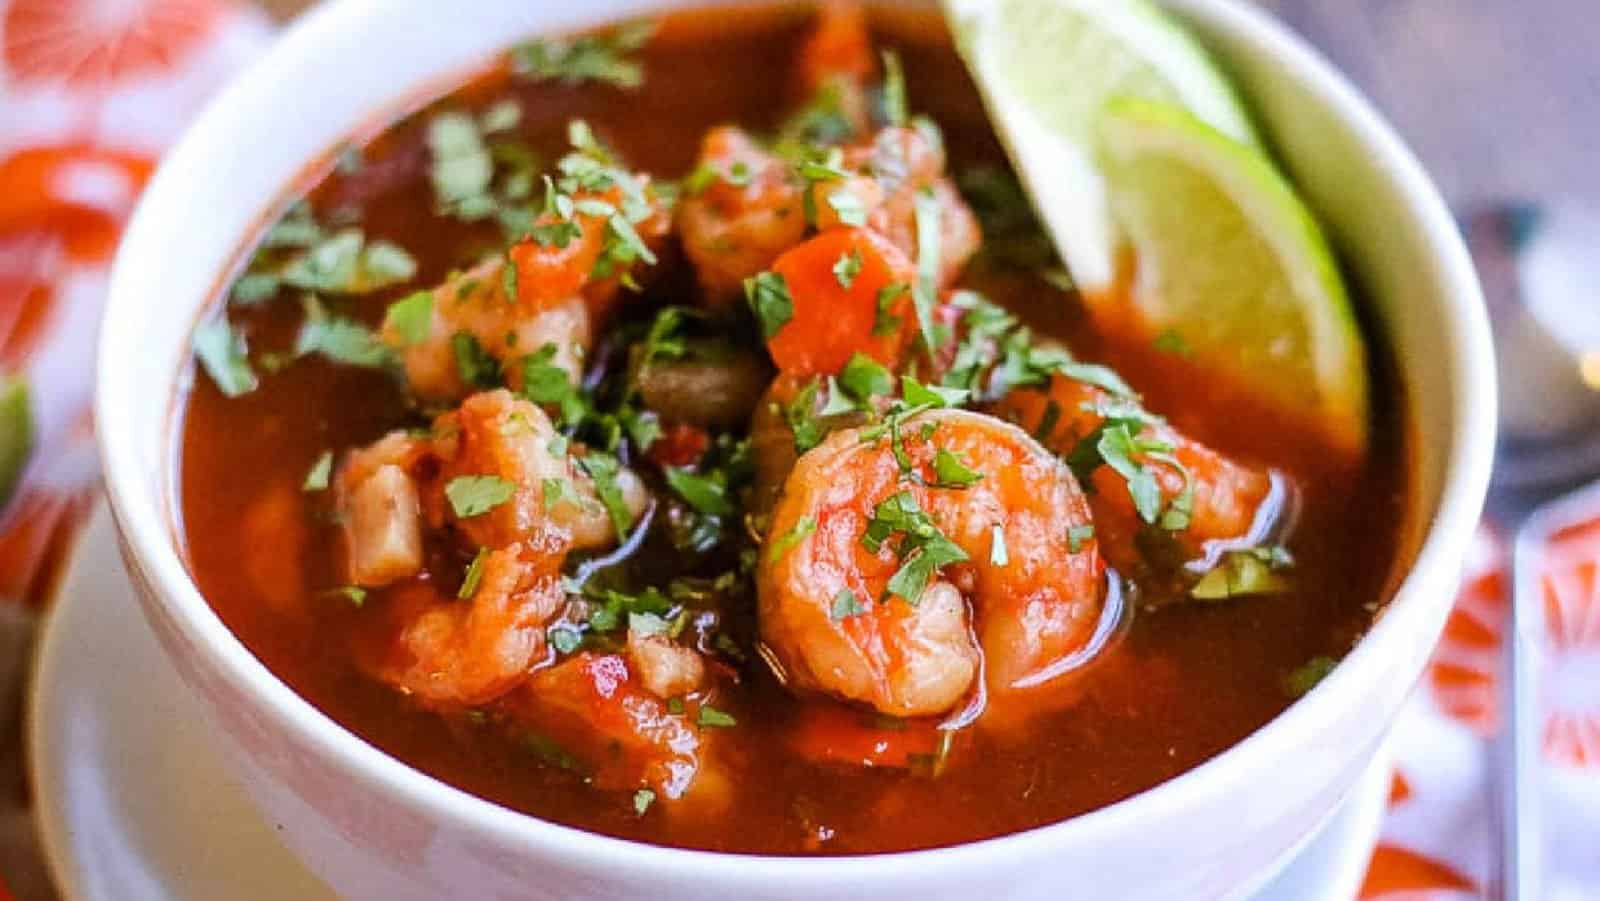 <p>Indulge in a warm, comforting bowl of Sopa de Camaron on a crisp evening. This Mexican shrimp soup can solve any comfort food cravings. Settle in for a cozy dinner at home or add a bit of warmth to a breezy seaside evening picnic.<br><strong>Get the Recipe: </strong><a href="https://allwaysdelicious.com/sopa-de-camarones-mexican-shrimp-soup/?utm_source=msn&utm_medium=page&utm_campaign=msn">Sopa de Camaron</a></p>